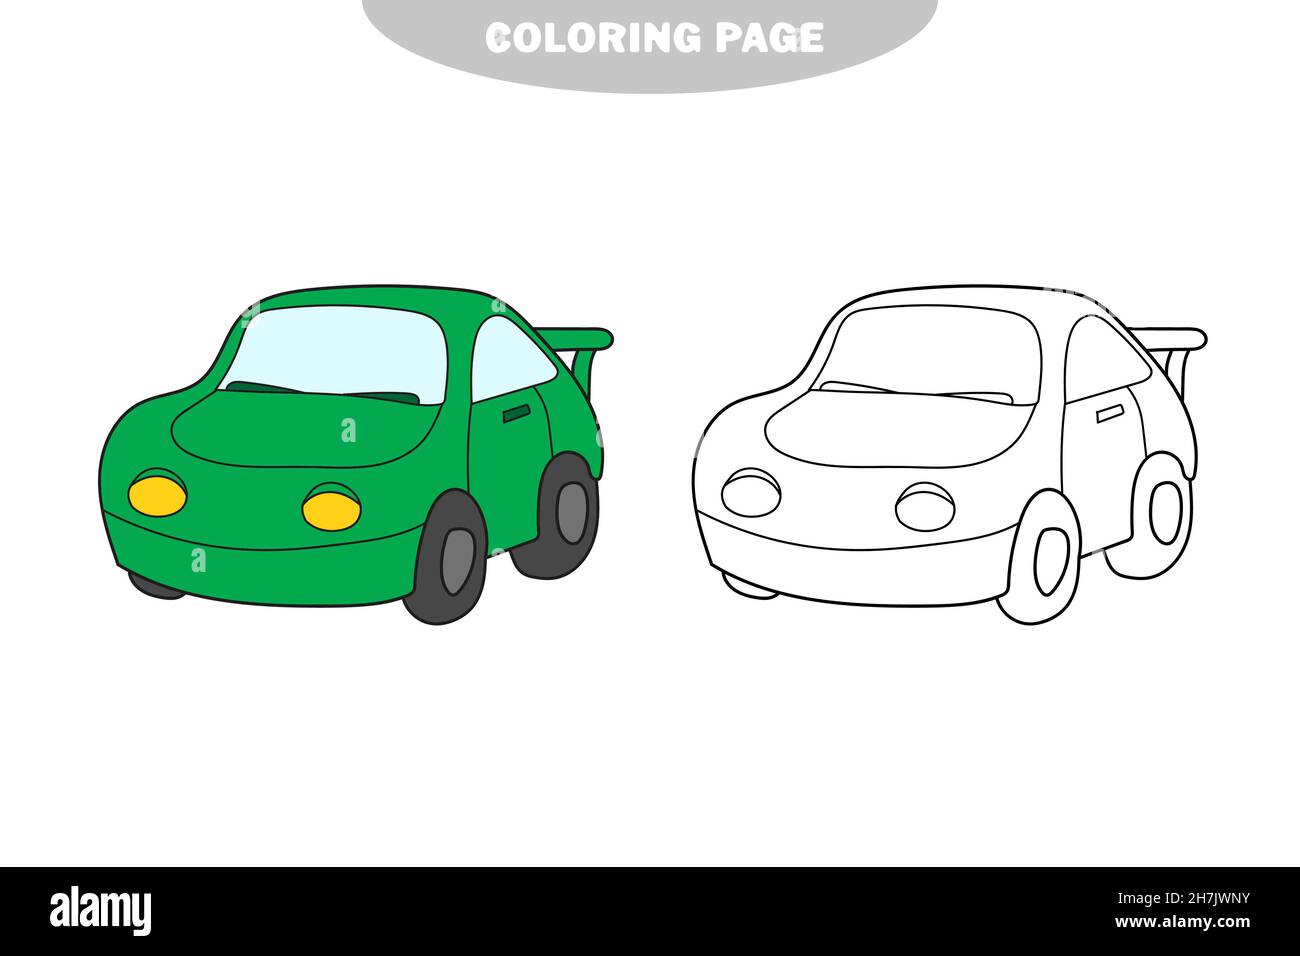 Simple coloring page vector illustration of cartoon car